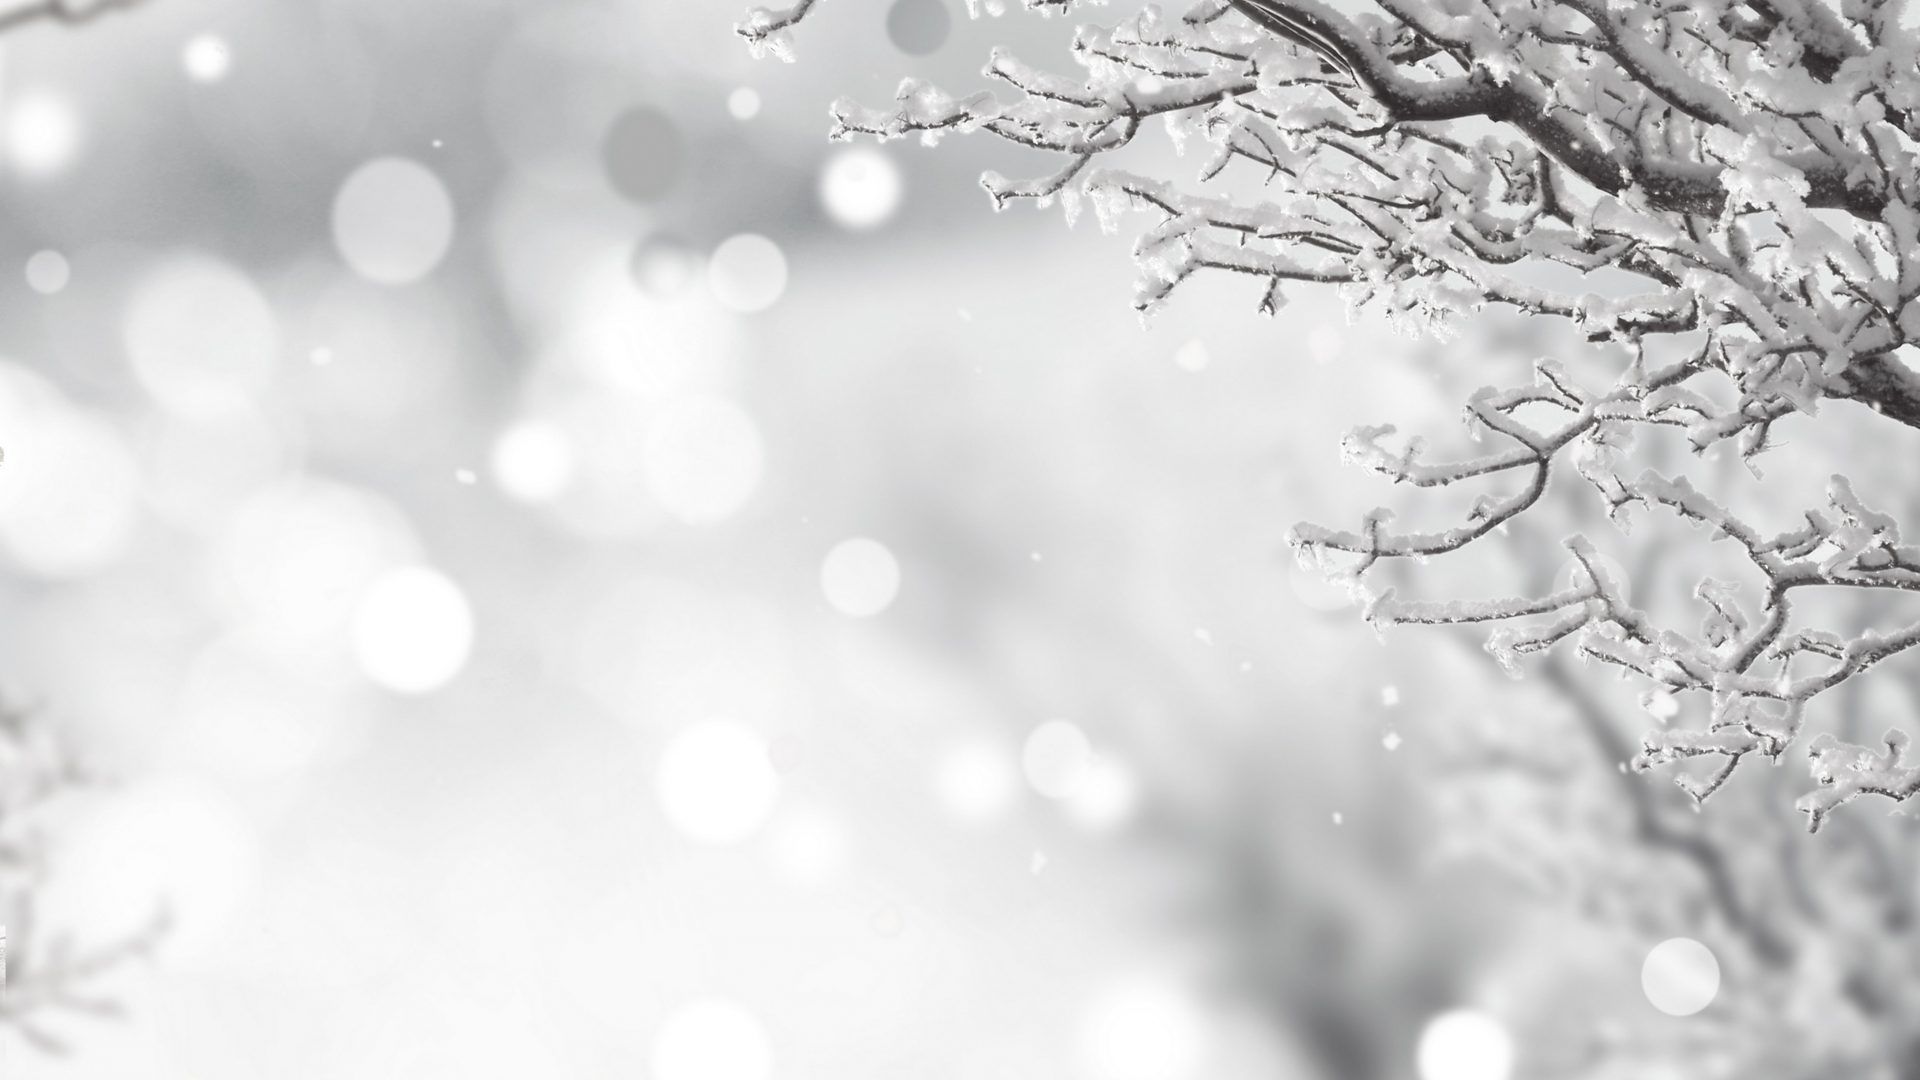 Free Desktop Wallpaper Winter Holiday And White Winter